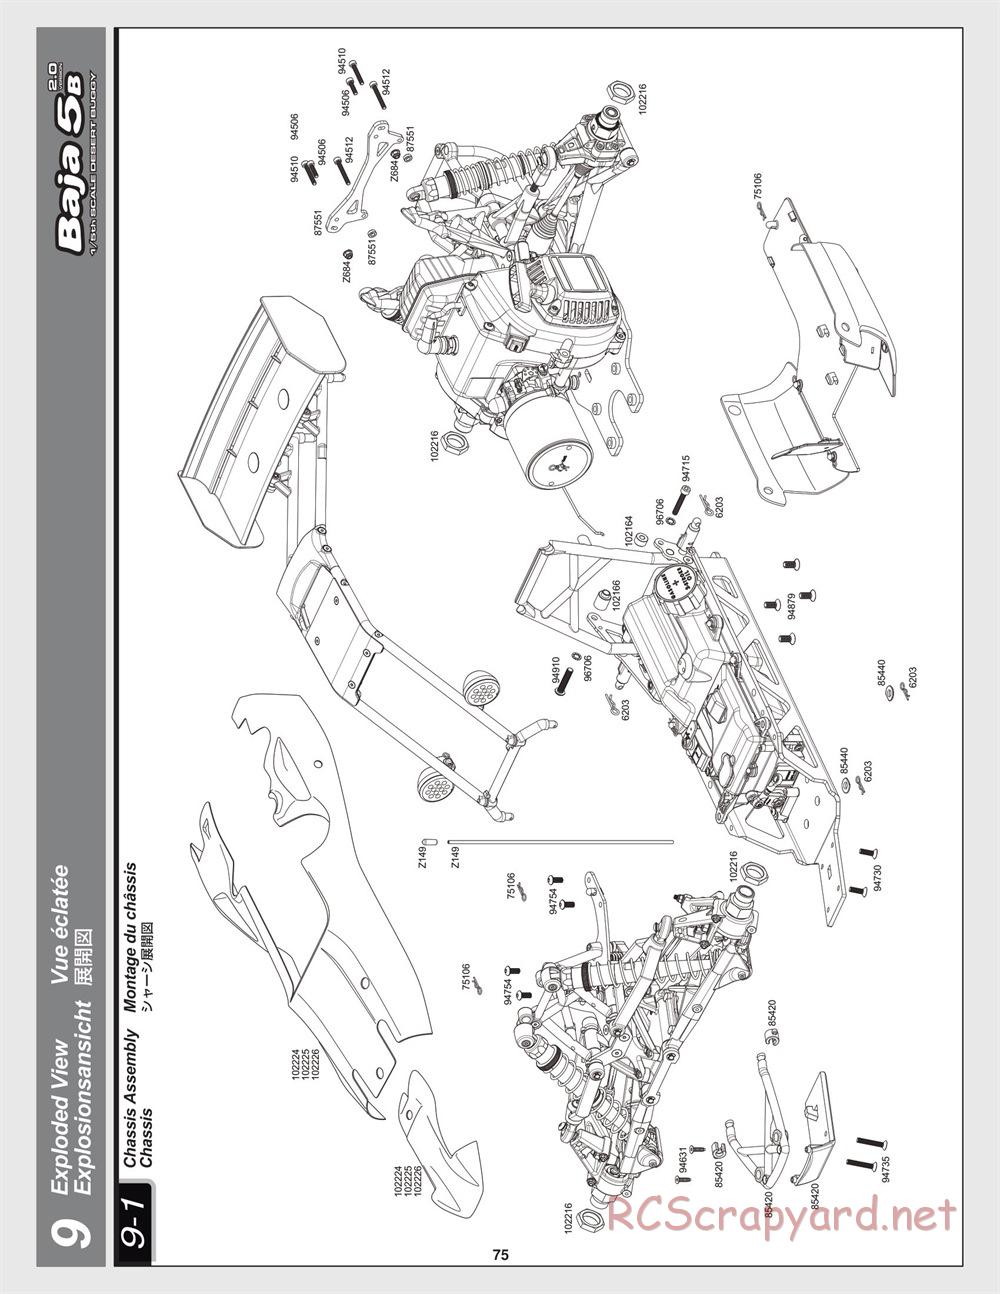 HPI - Baja 5B 2.0 - Exploded View - Page 75